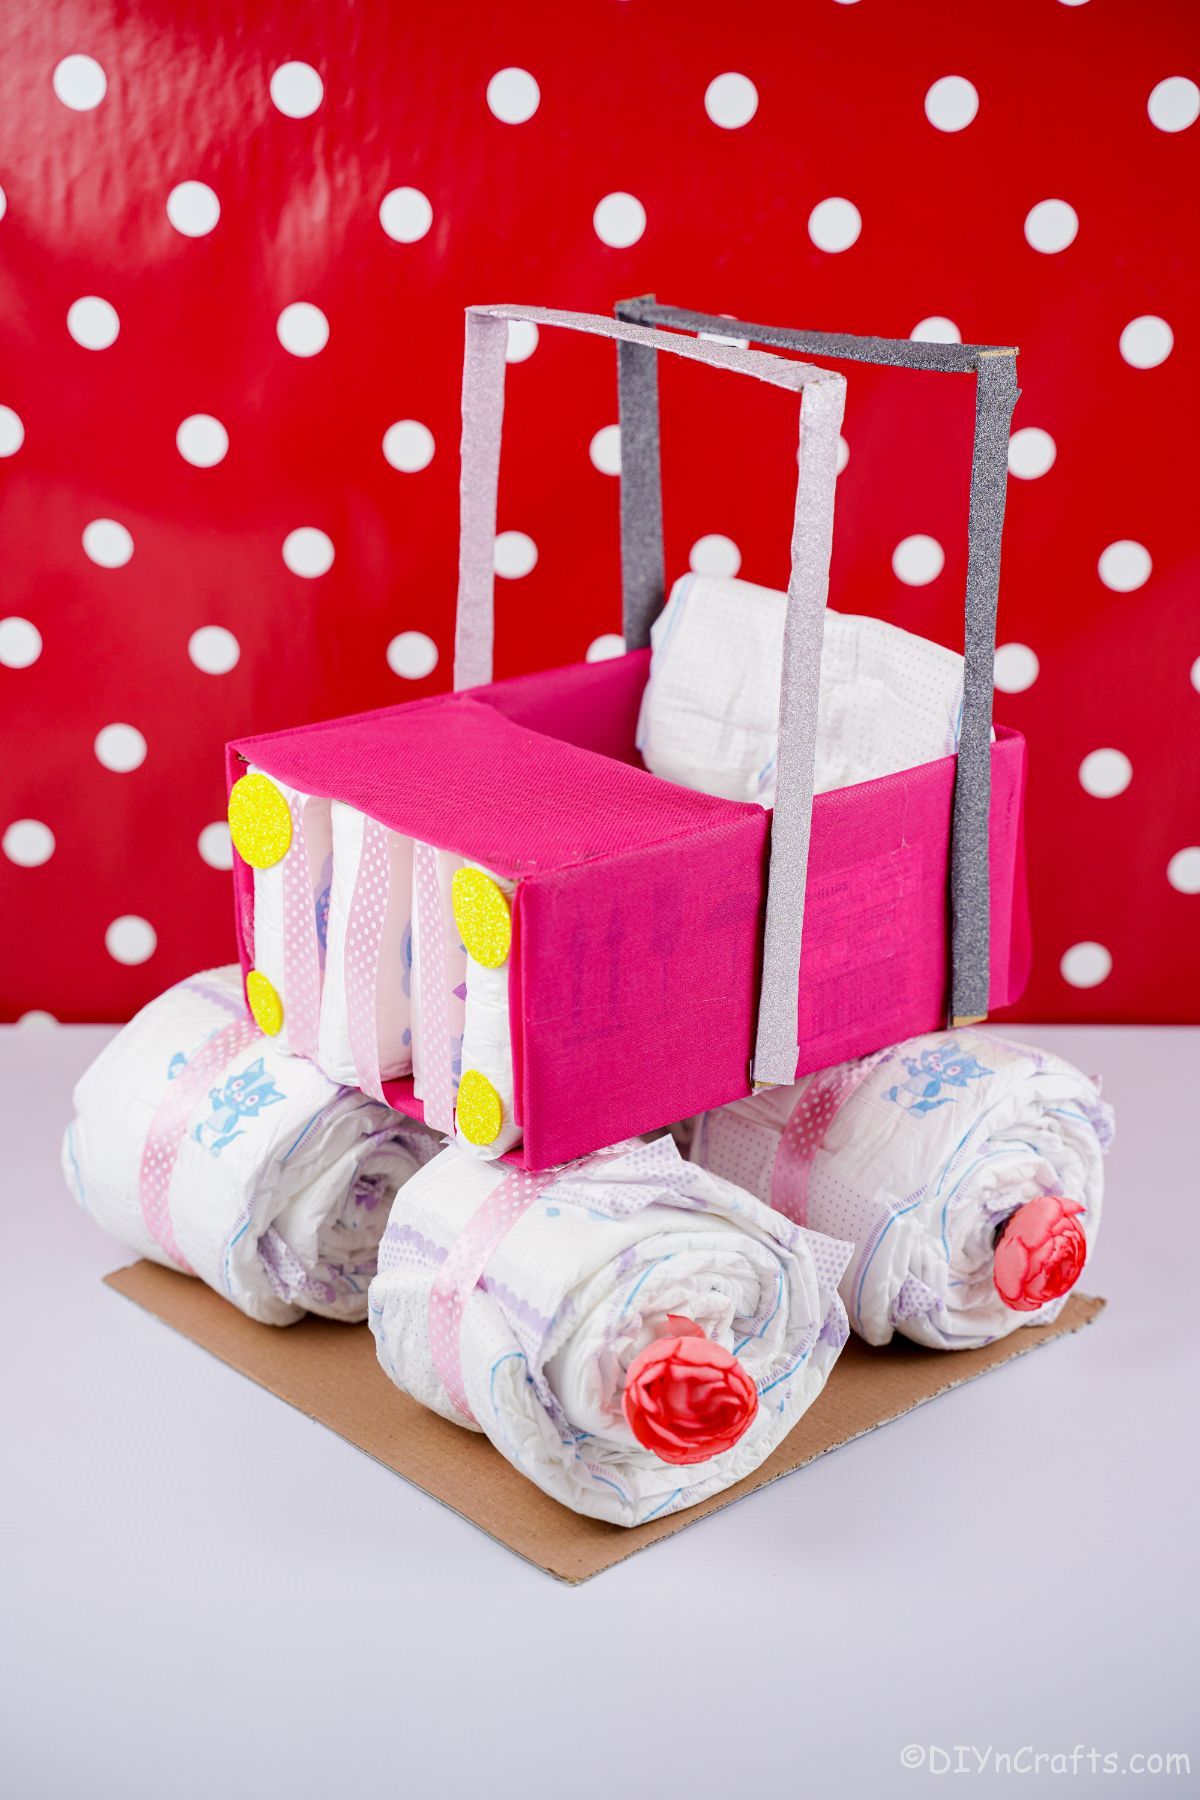 pink safari car diaper cake with red and white polka dot background